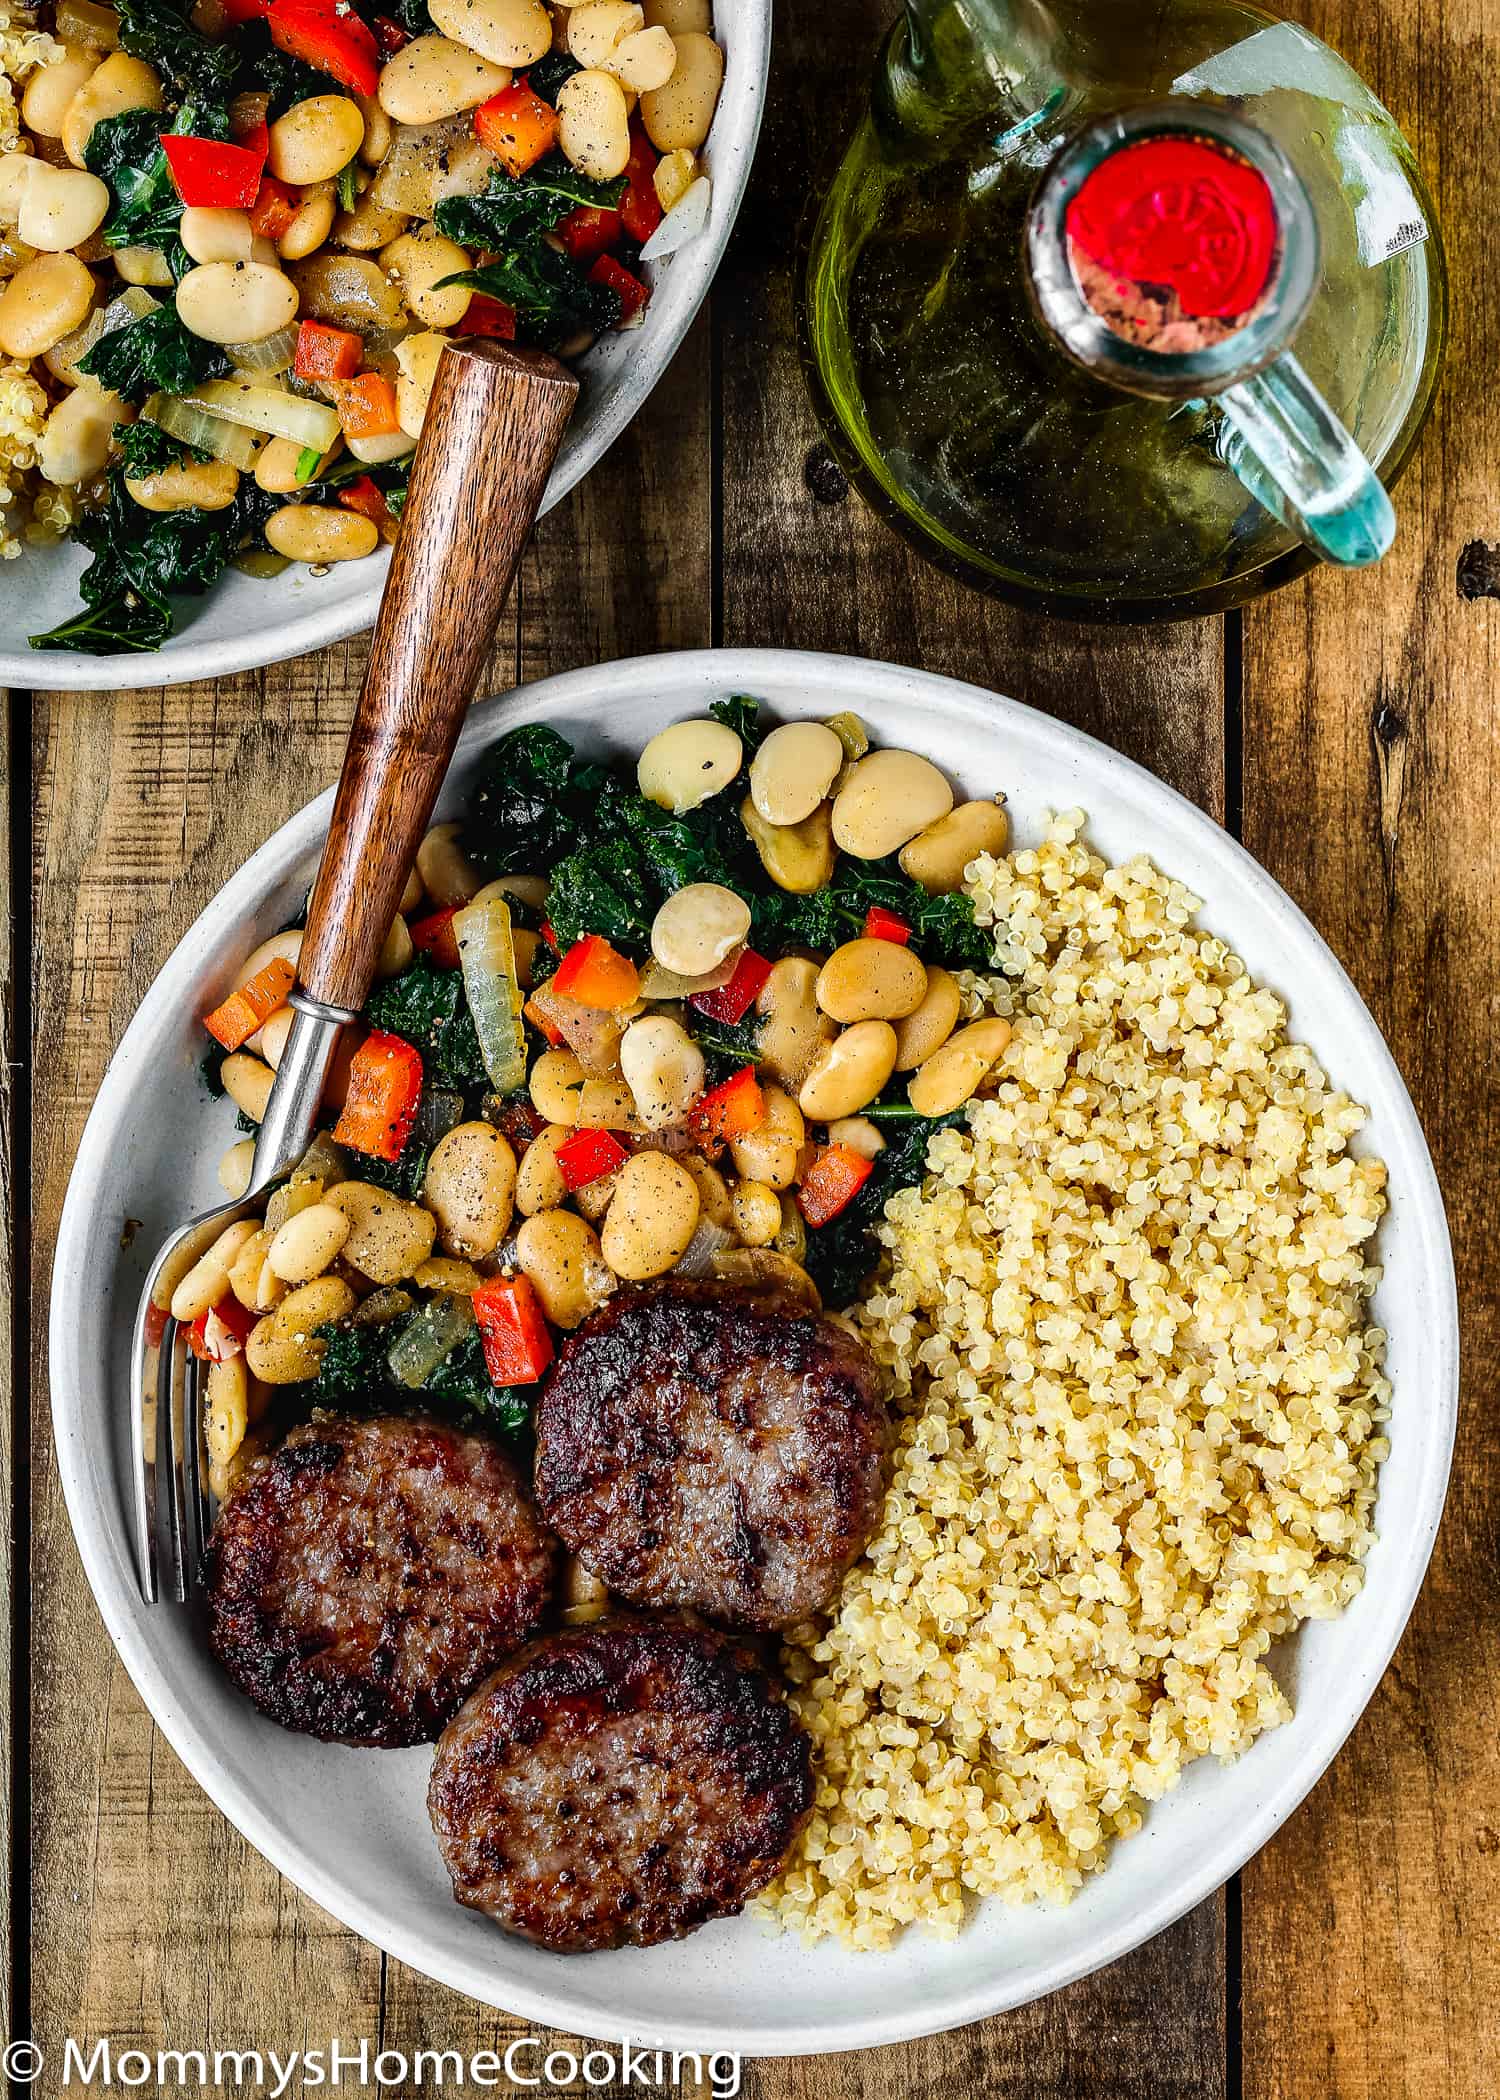 This Easy Sausage and Bean Quinoa Bowl is a delicious way to bring breakfast to the dinner table! Made with breakfast sausage, quinoa, beans, kale and veggies, this satisfying meal comes together in no time! https://mommyshomecooking.com